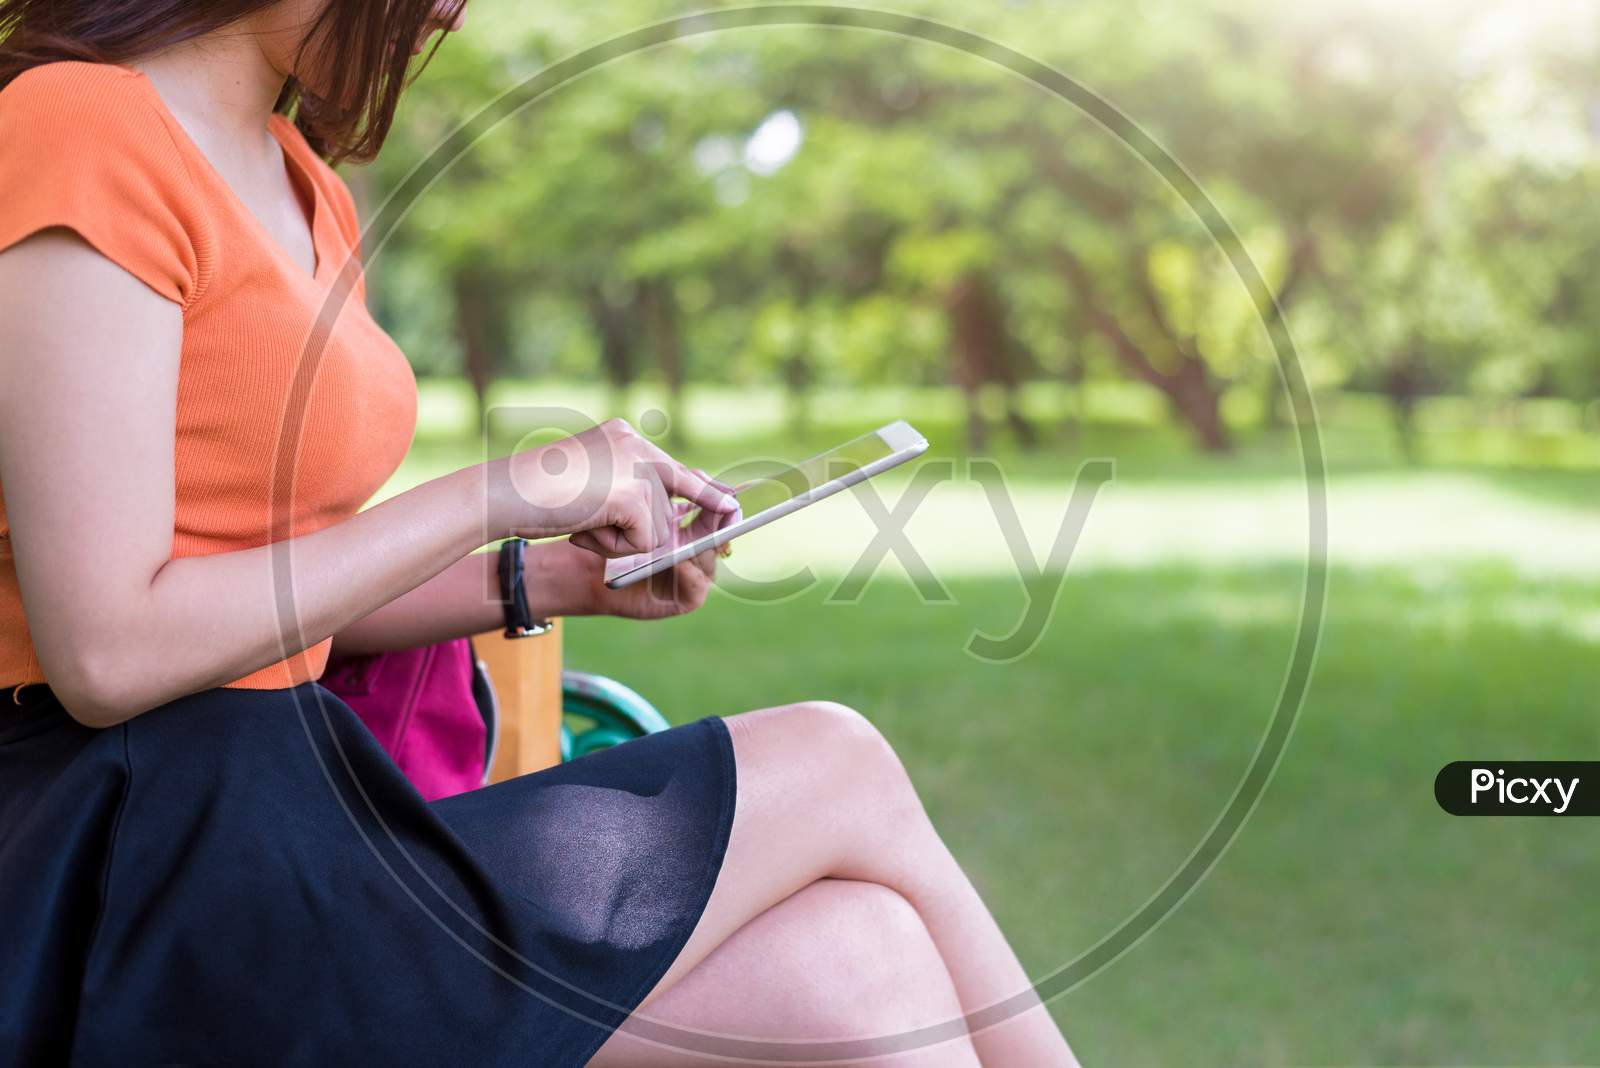 Beauty Woman Using Tablet In The Park. Technology And Lifestyles Concept. Outdoor And Nature Theme.